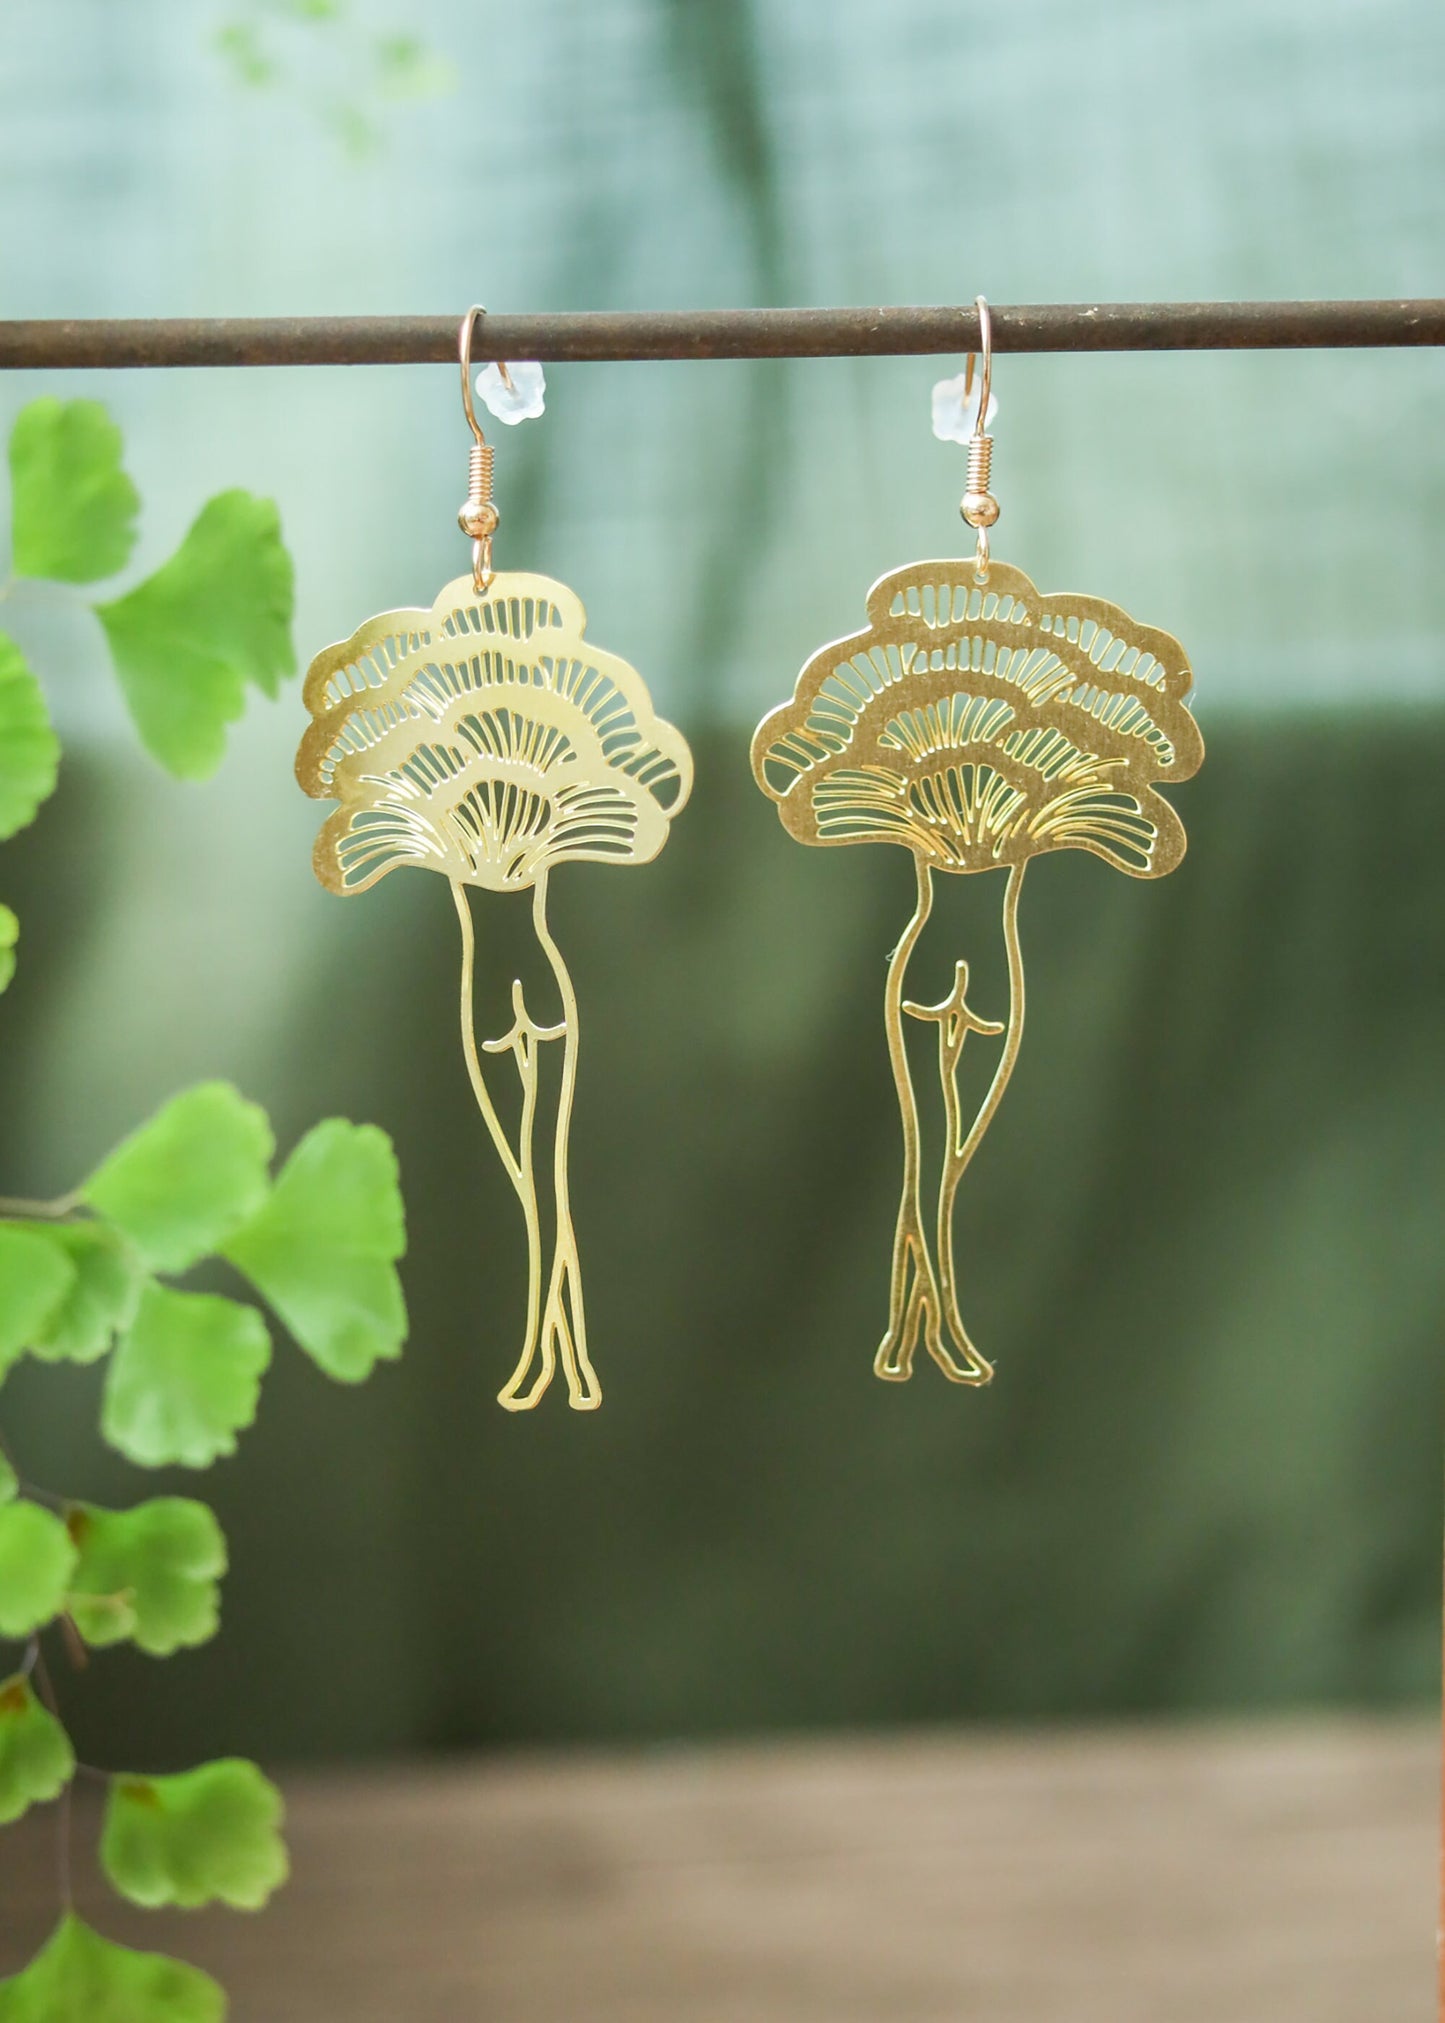 Mushroom Lady Earrings | Witchy Chanterelle Fungi Dangles | Brass Gold Tone Fairycore Fantasy Jewelry | Cottagecore Toadstool Legs Charm